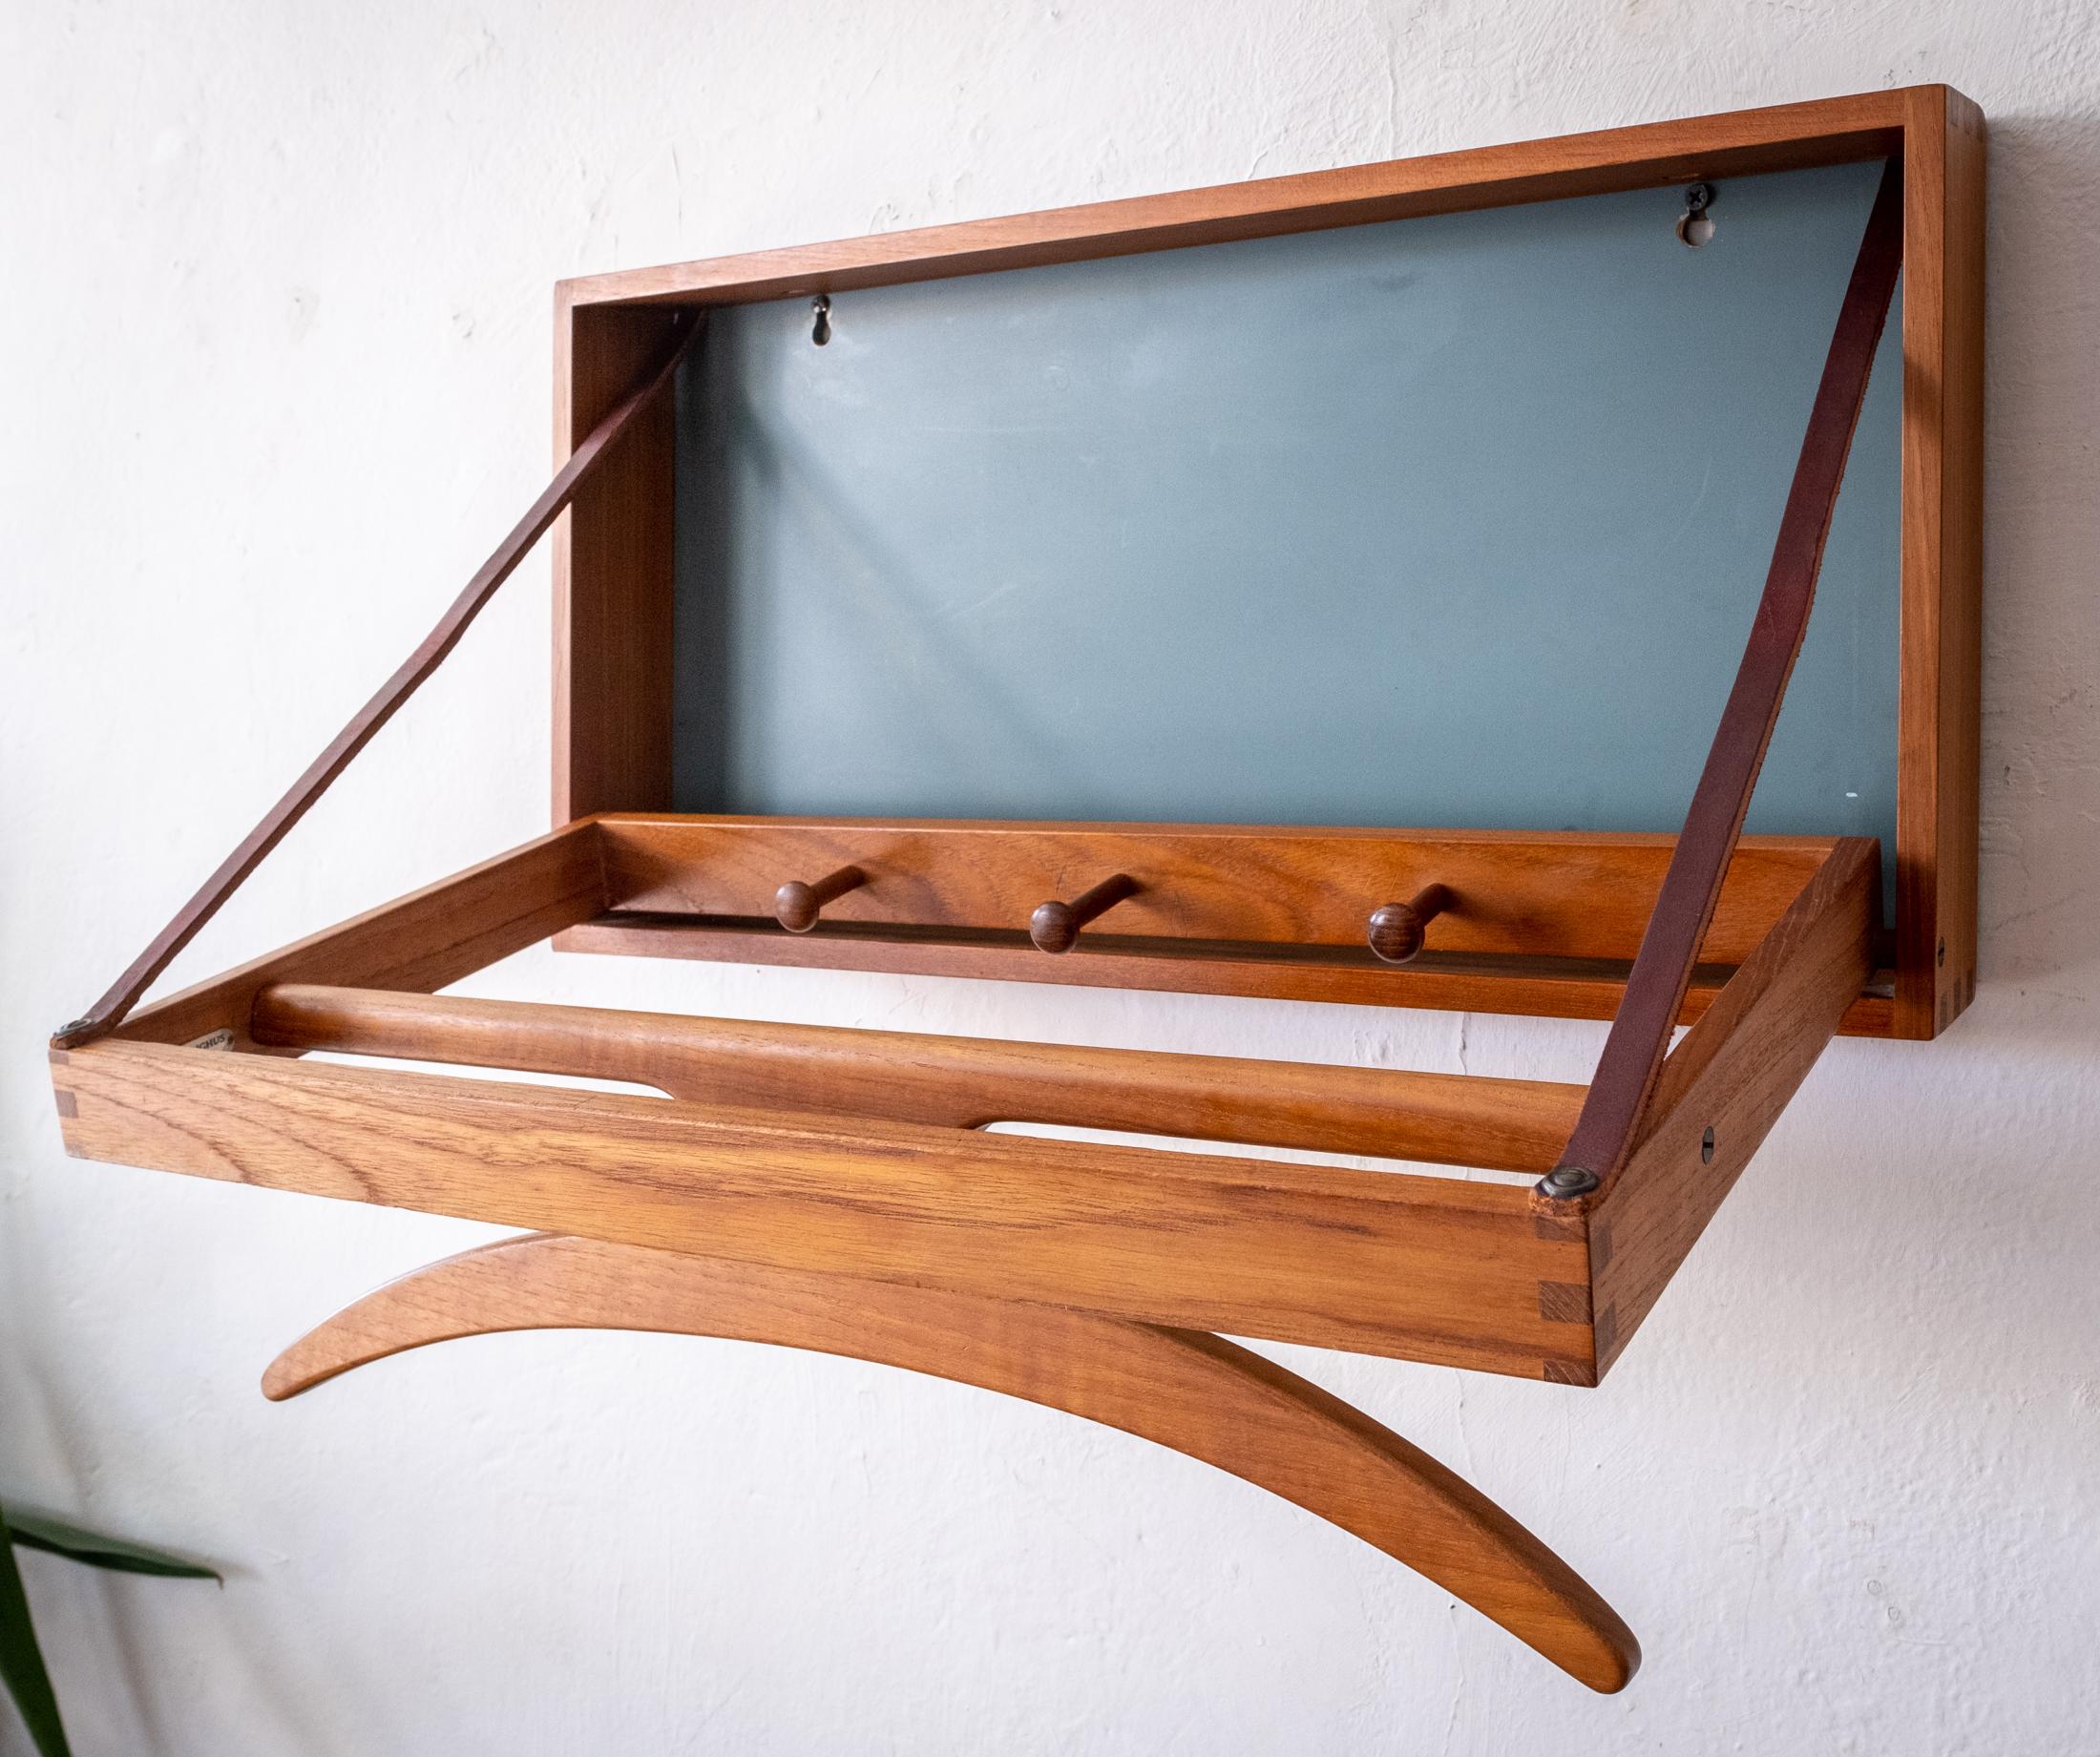 Danish Modern Adam Hoff & Poul Østergaard for Virum Møbelsnedkeri wall-mount teak valet. Includes a label from the high end Danish retailer Illums Bolighus. Trip-Trap design made of solid teak with leather straps and blue green back. A beautiful and